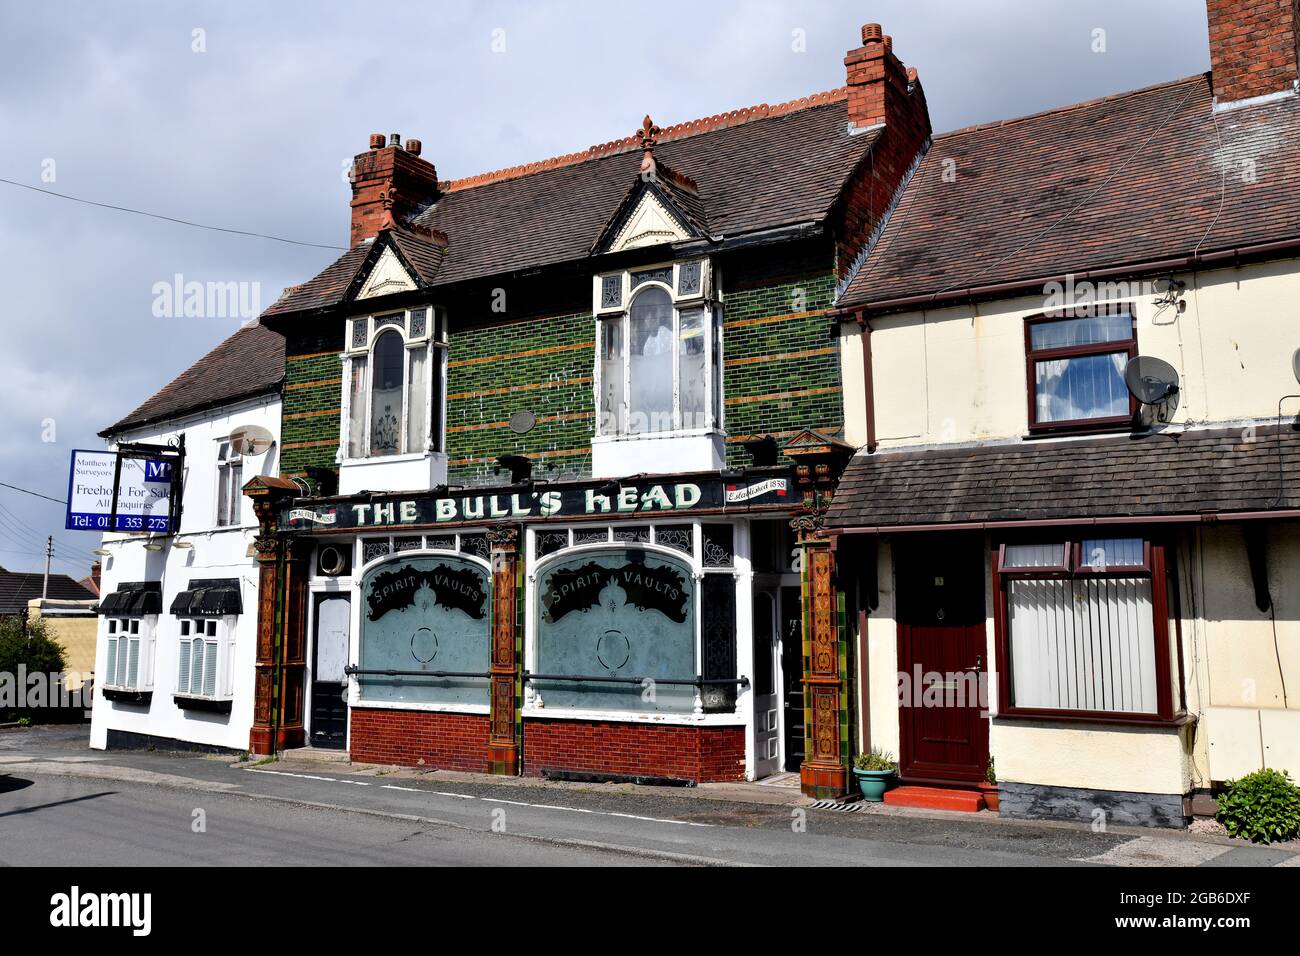 The Bull's Head public house a classical English pub and grade 2 listed building which closed and up for sale Stock Photo